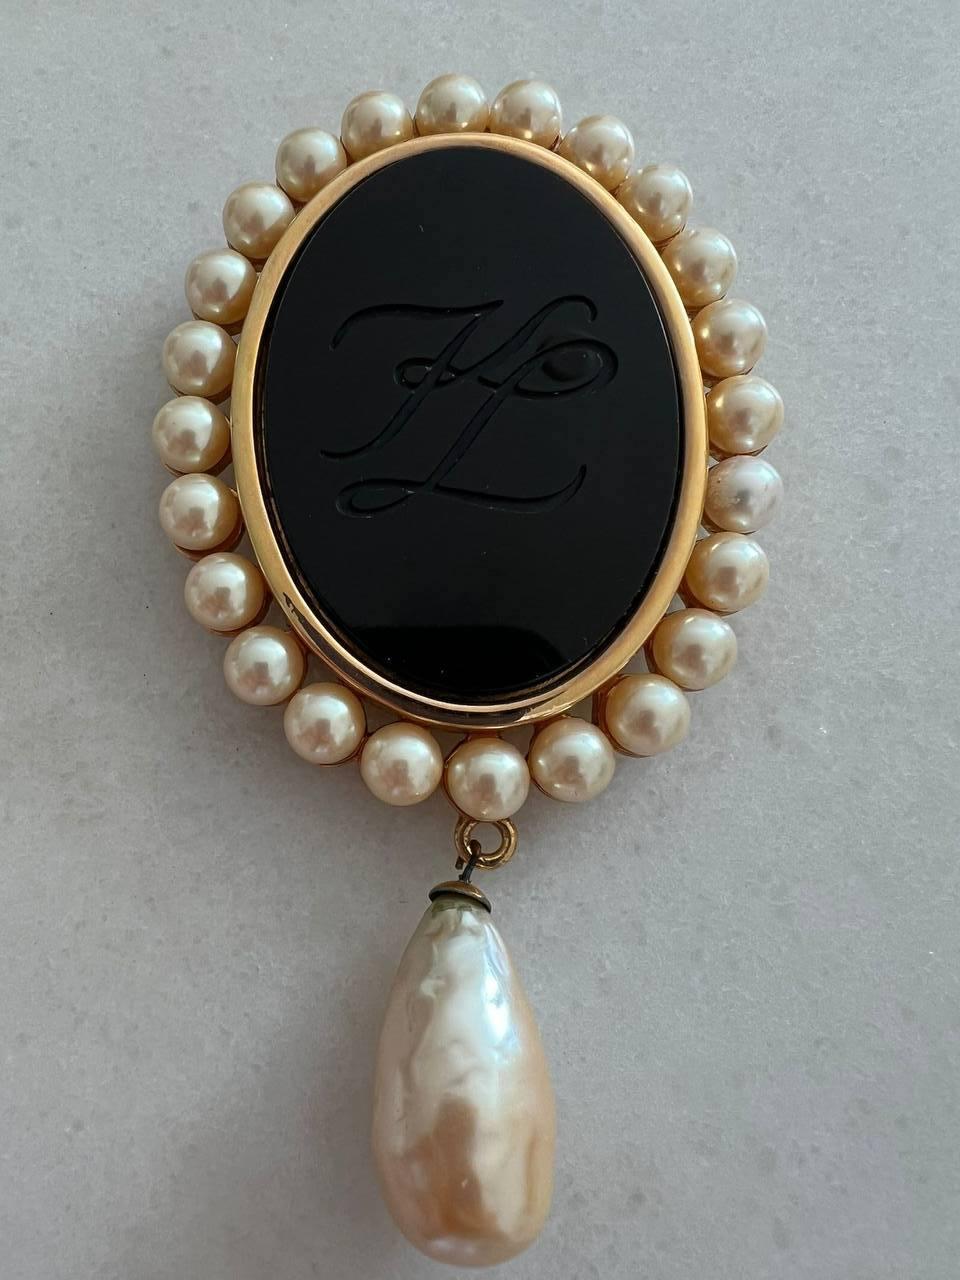 Vintage brooch black glass embossed with KL logo in gold-tone setting by Karl Lagerfeld. Accented with faux baroque pearls.
Signed. 
Period: 1990s
Dimensions: 
Length: 11,5 cm 
Width: 6,5 cm 
Condition: very good.

........Additional information